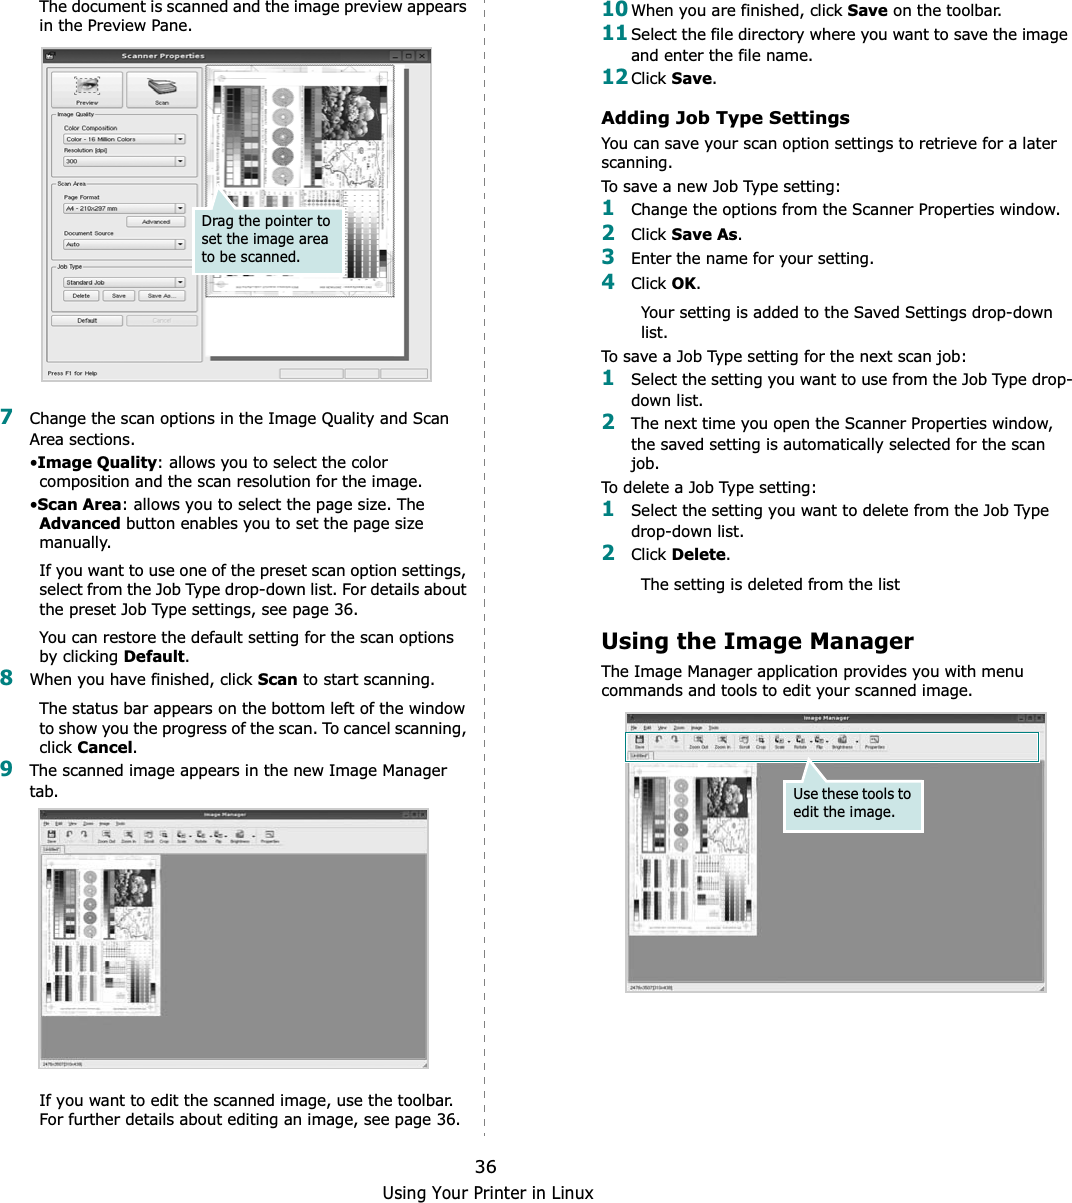 Using Your Printer in Linux36The document is scanned and the image preview appears in the Preview Pane.7Change the scan options in the Image Quality and Scan Area sections.•Image Quality: allows you to select the color composition and the scan resolution for the image.•Scan Area: allows you to select the page size. The Advanced button enables you to set the page size manually.If you want to use one of the preset scan option settings, select from the Job Type drop-down list. For details about the preset Job Type settings, see page 36.You can restore the default setting for the scan options by clicking Default.8When you have finished, click Scan to start scanning.The status bar appears on the bottom left of the window to show you the progress of the scan. To cancel scanning, click Cancel.9The scanned image appears in the new Image Manager tab.If you want to edit the scanned image, use the toolbar. For further details about editing an image, see page 36.Drag the pointer to set the image area to be scanned.10When you are finished, click Save on the toolbar.11Select the file directory where you want to save the image and enter the file name. 12Click Save.Adding Job Type SettingsYou can save your scan option settings to retrieve for a later scanning.To save a new Job Type setting:1Change the options from the Scanner Properties window.2Click Save As.3Enter the name for your setting.4Click OK.Your setting is added to the Saved Settings drop-down list.To save a Job Type setting for the next scan job:1Select the setting you want to use from the Job Type drop-down list.2The next time you open the Scanner Properties window, the saved setting is automatically selected for the scan job.To delete a Job Type setting:1Select the setting you want to delete from the Job Type drop-down list.2Click Delete.The setting is deleted from the listUsing the Image ManagerThe Image Manager application provides you with menu commands and tools to edit your scanned image.Use these tools to edit the image.